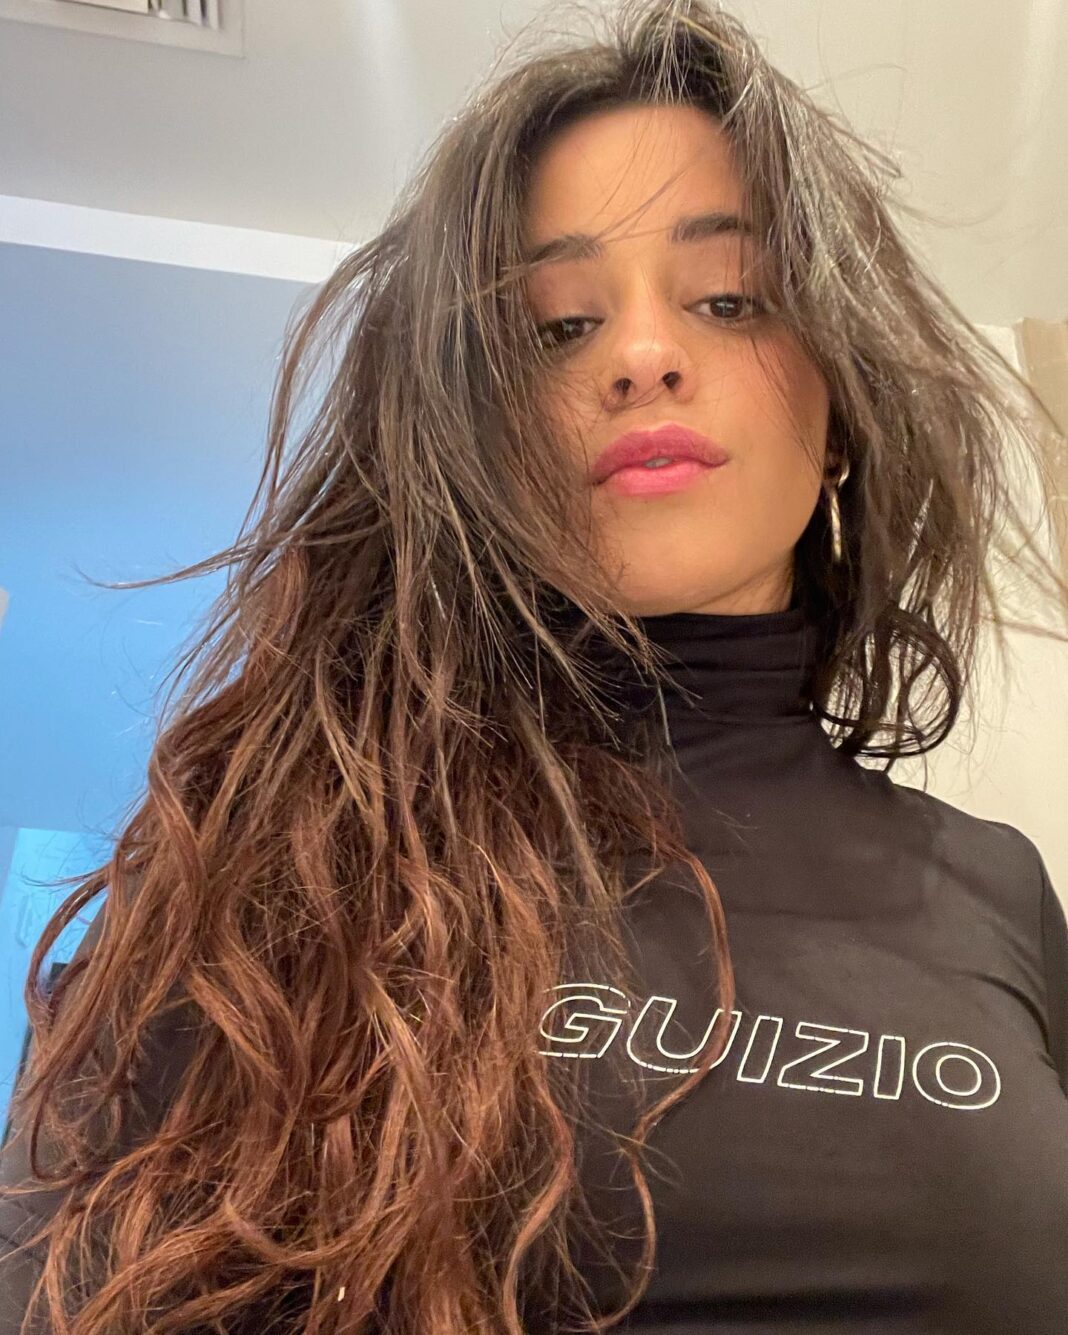 Camila Cabello Is Exhausted From Fighting the Society About Her Body Image